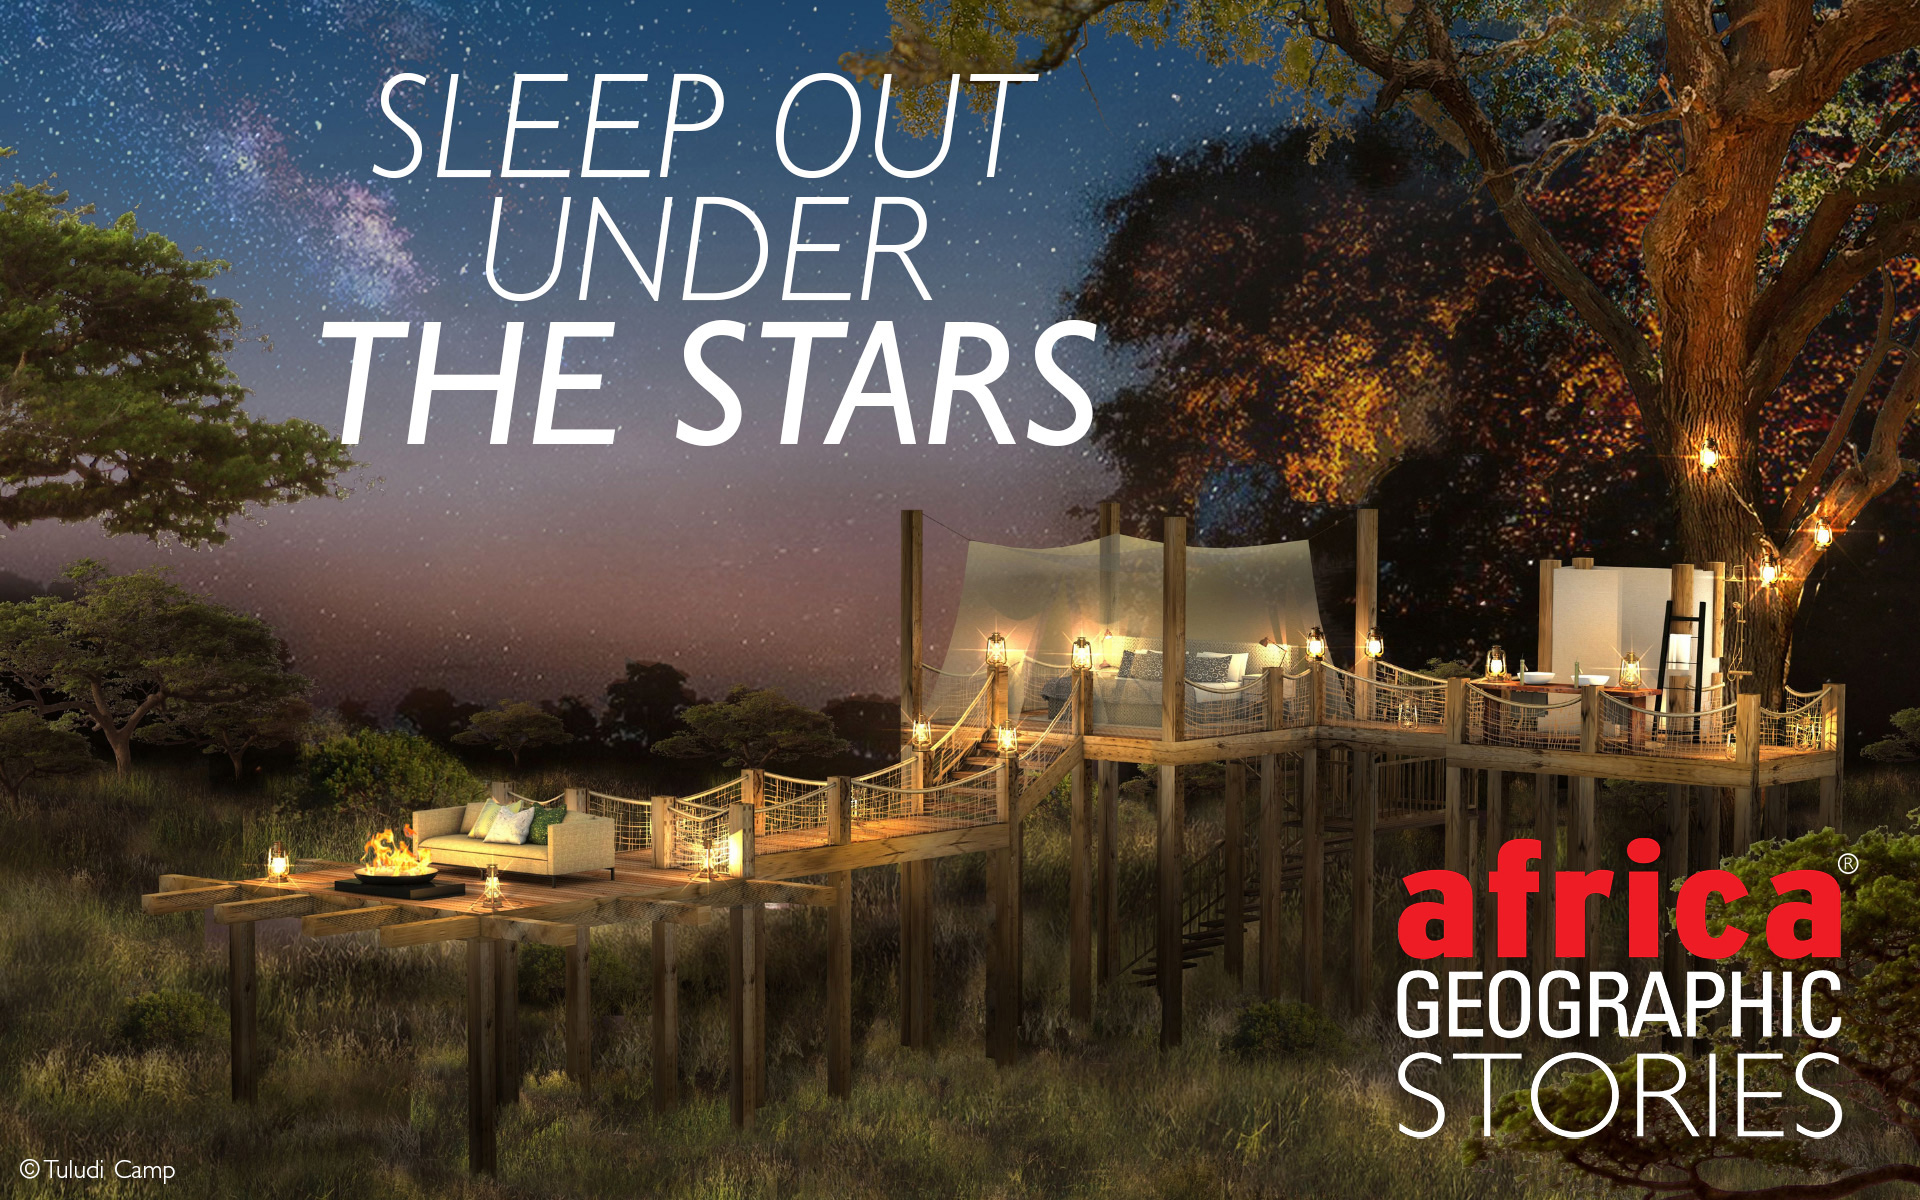 Sleep out under the stars